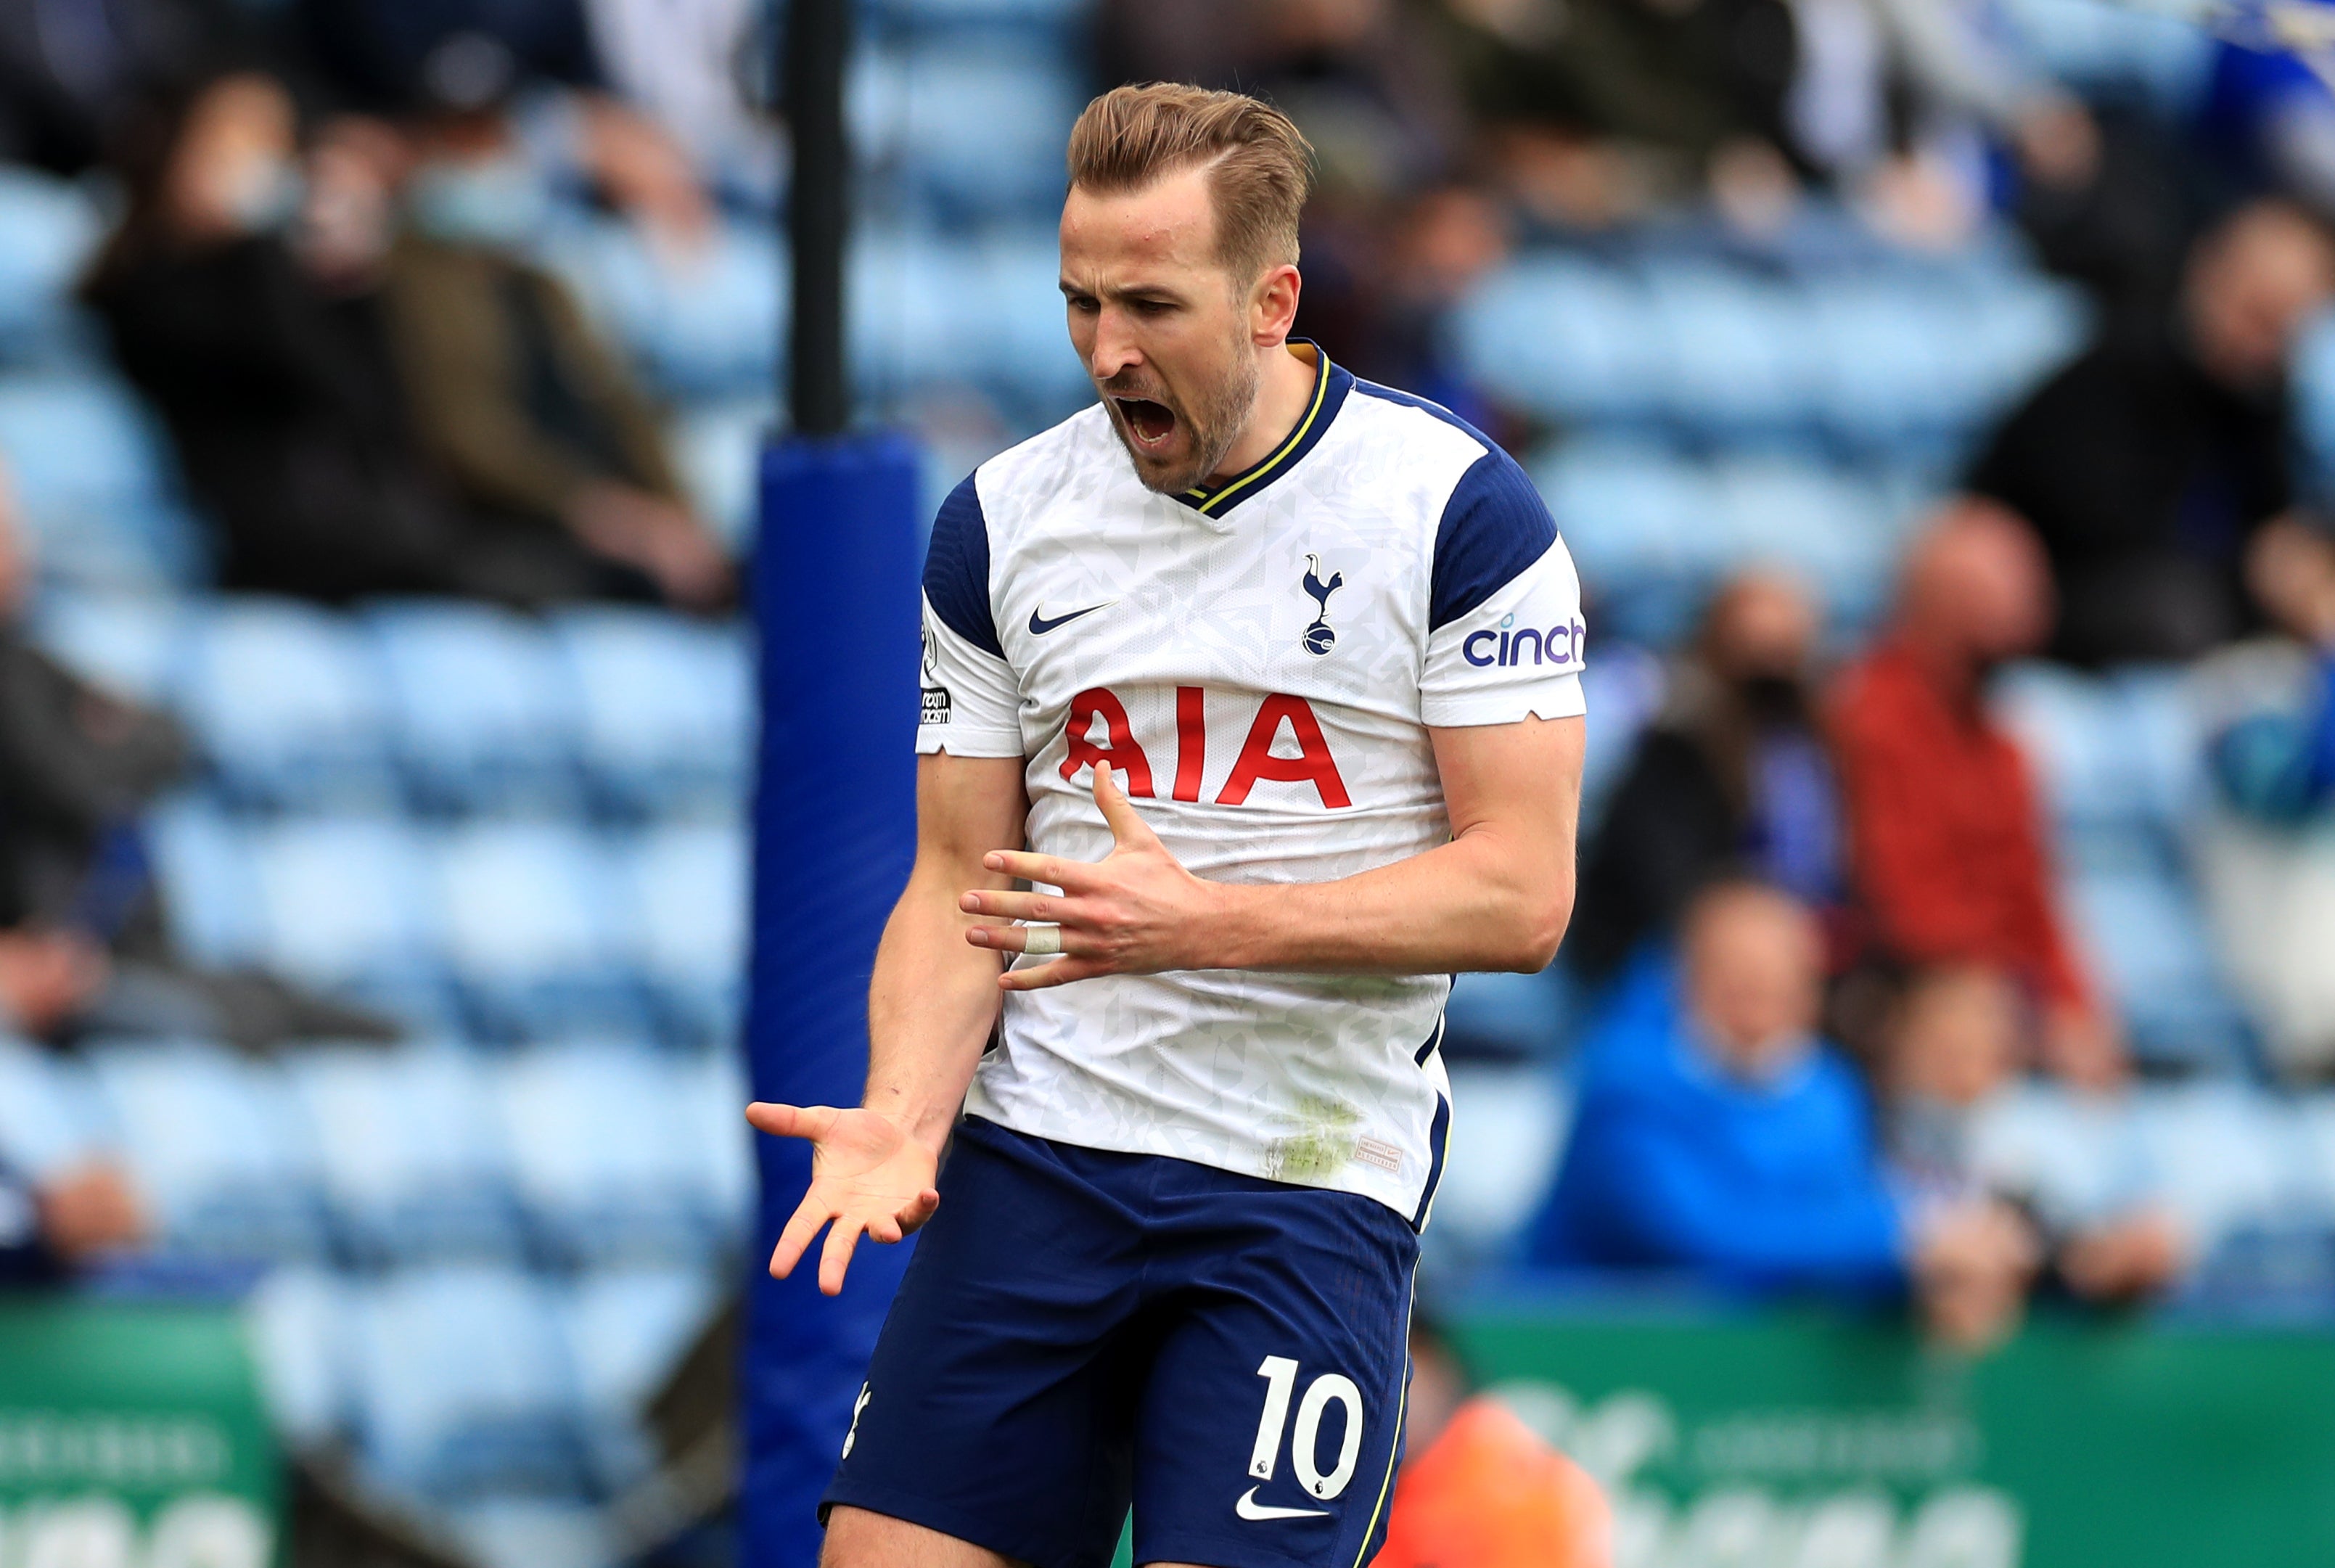 Tottenham’s Harry Kane celebrates after scoring his 23rd-goal of the season at Leicester